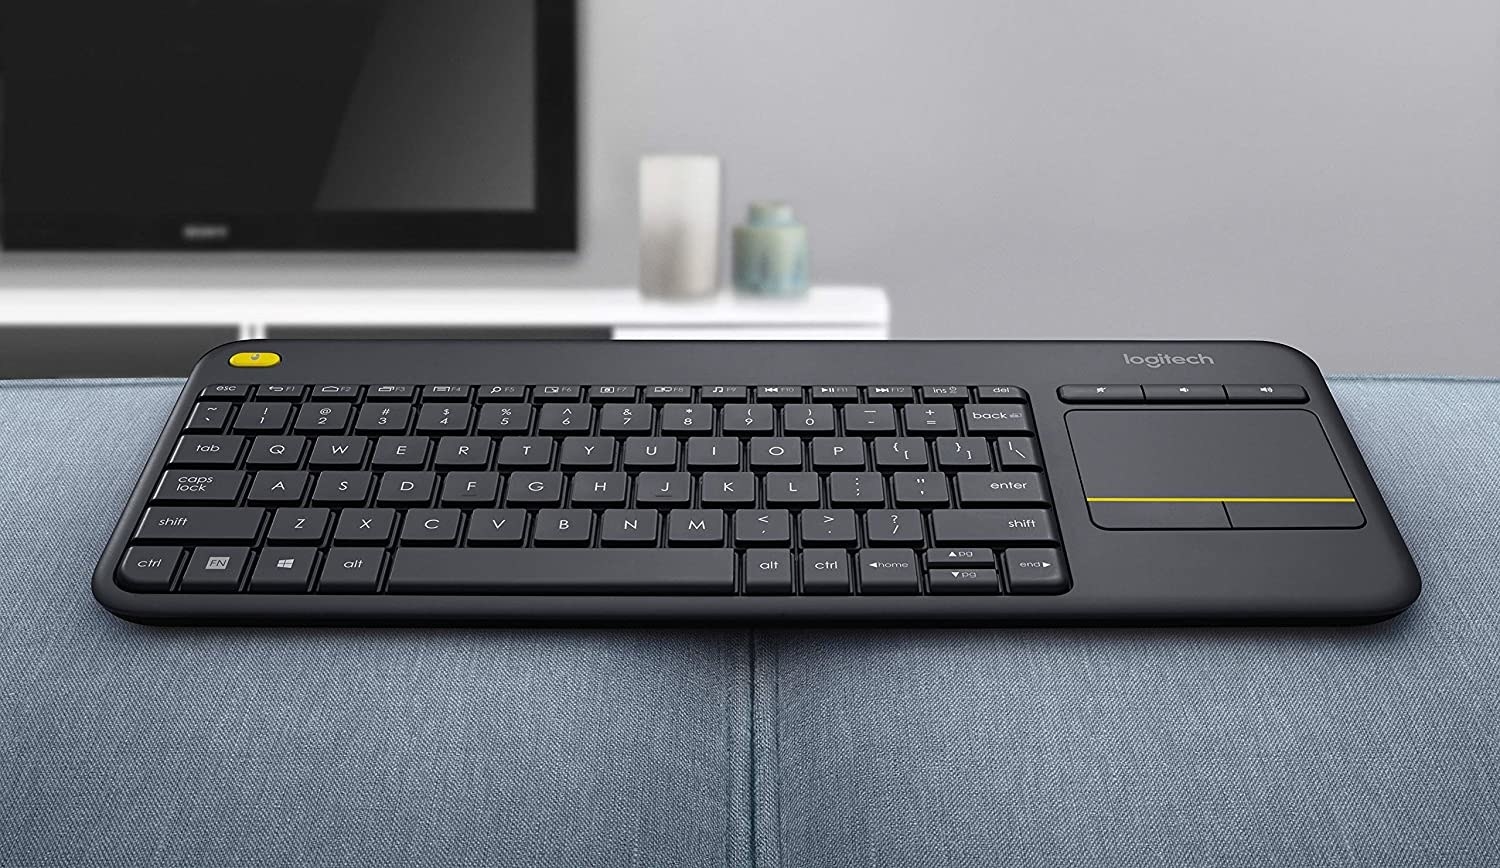 the wireless keyboard on a couch